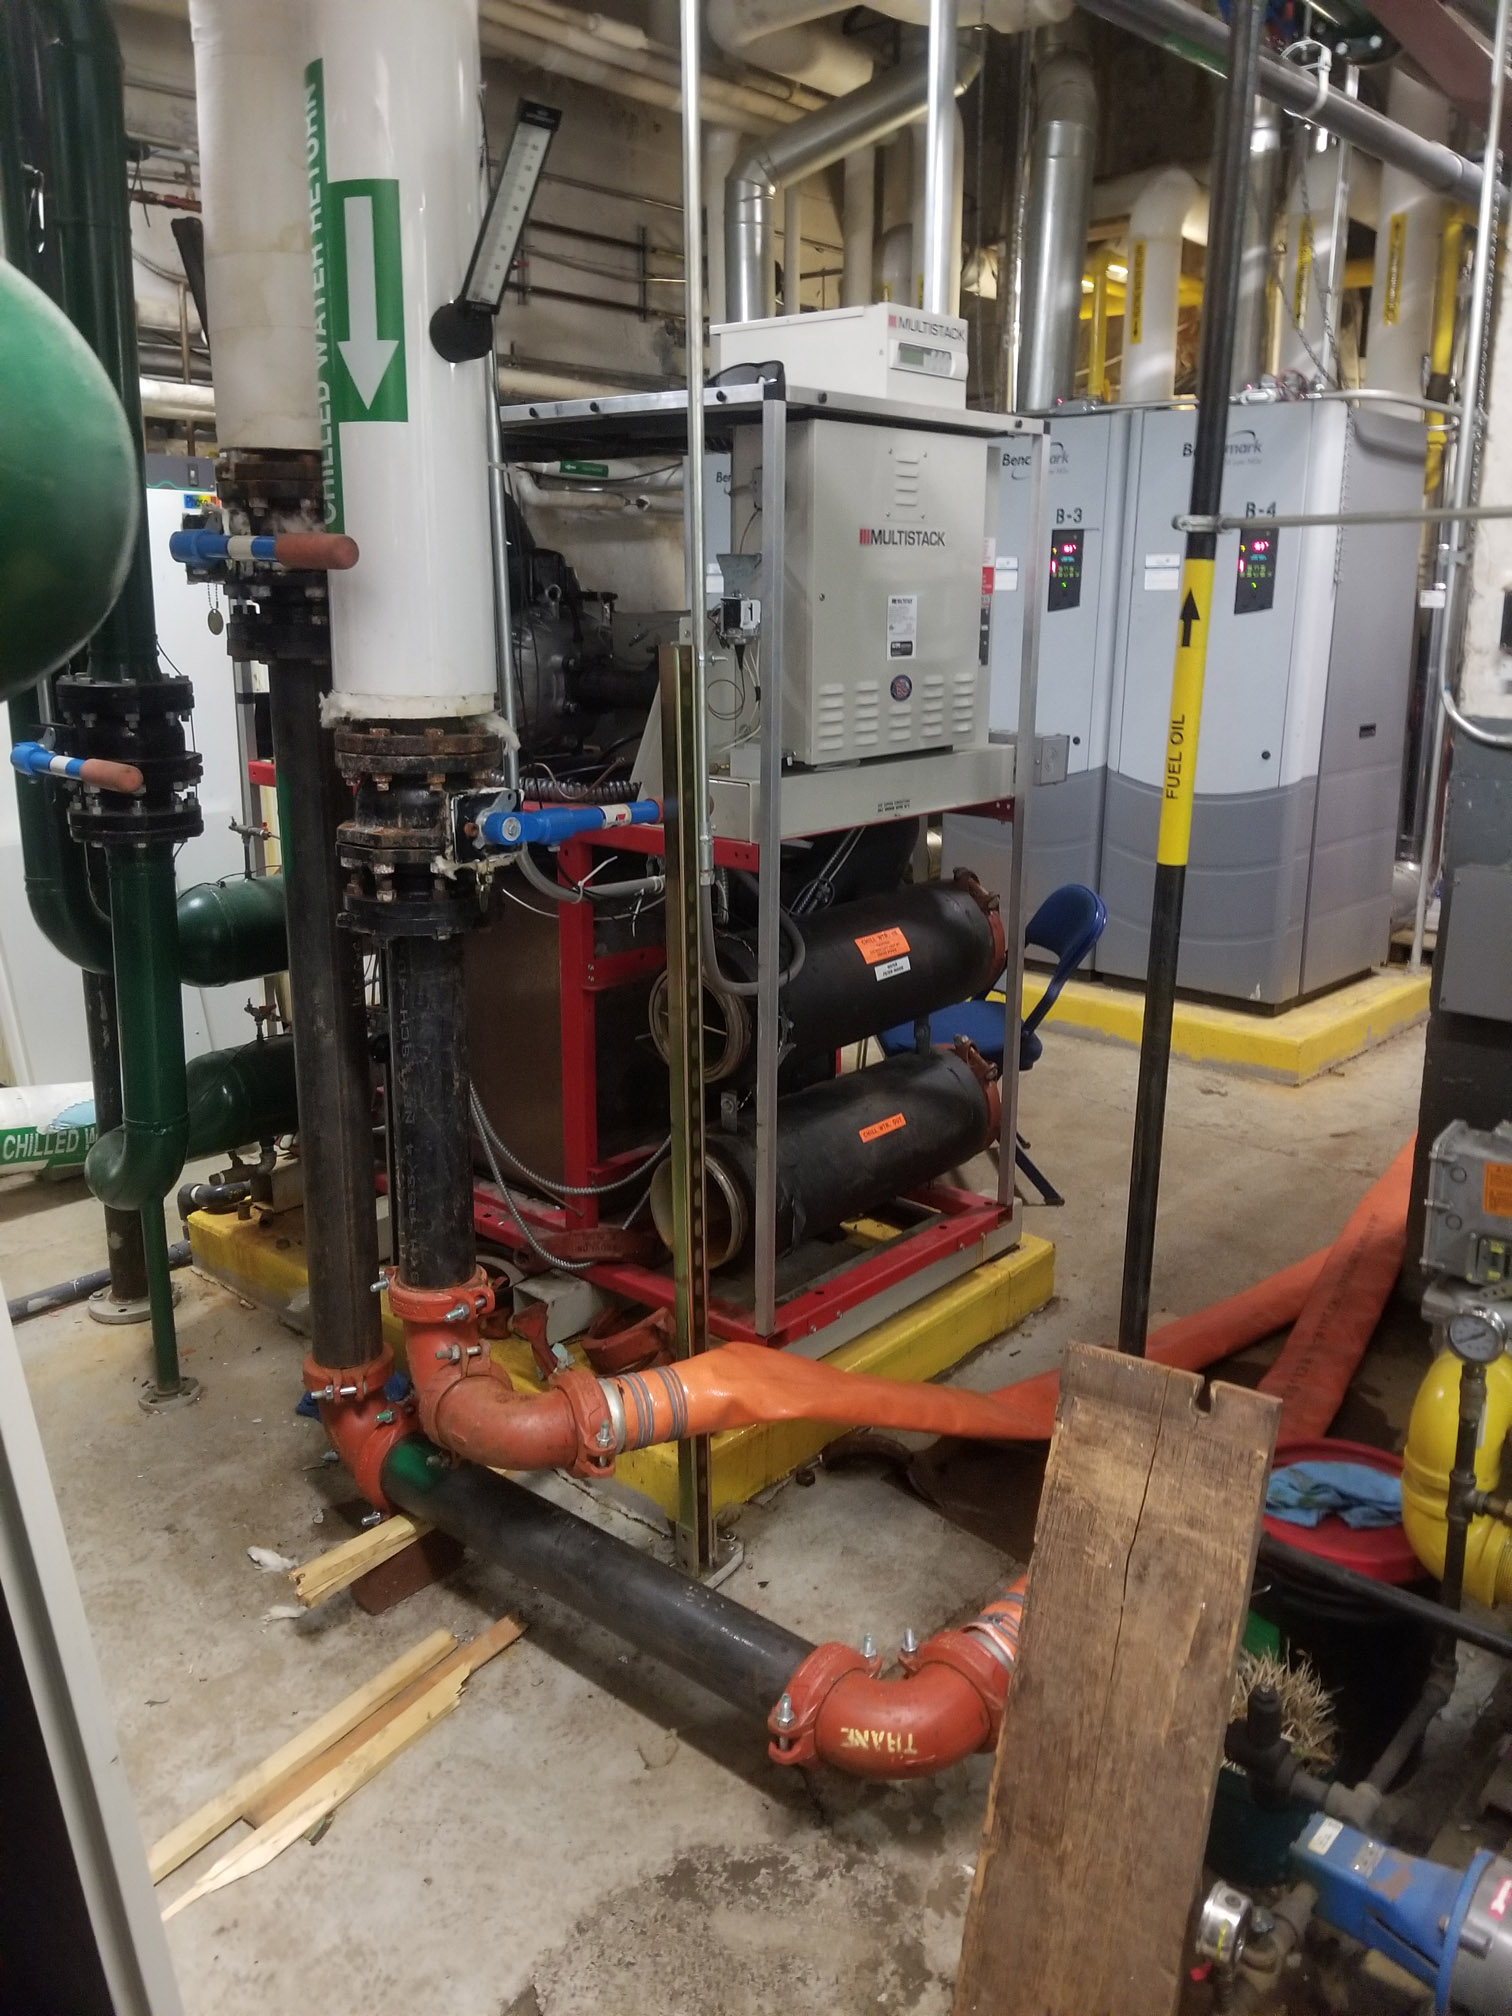 Air Cooled Chiller Rental Monroe County FL, Chiller AC Rental Monroe County FL, Temporary Chiller Monroe County FL, Rental Chiller Installation Monroe County FL